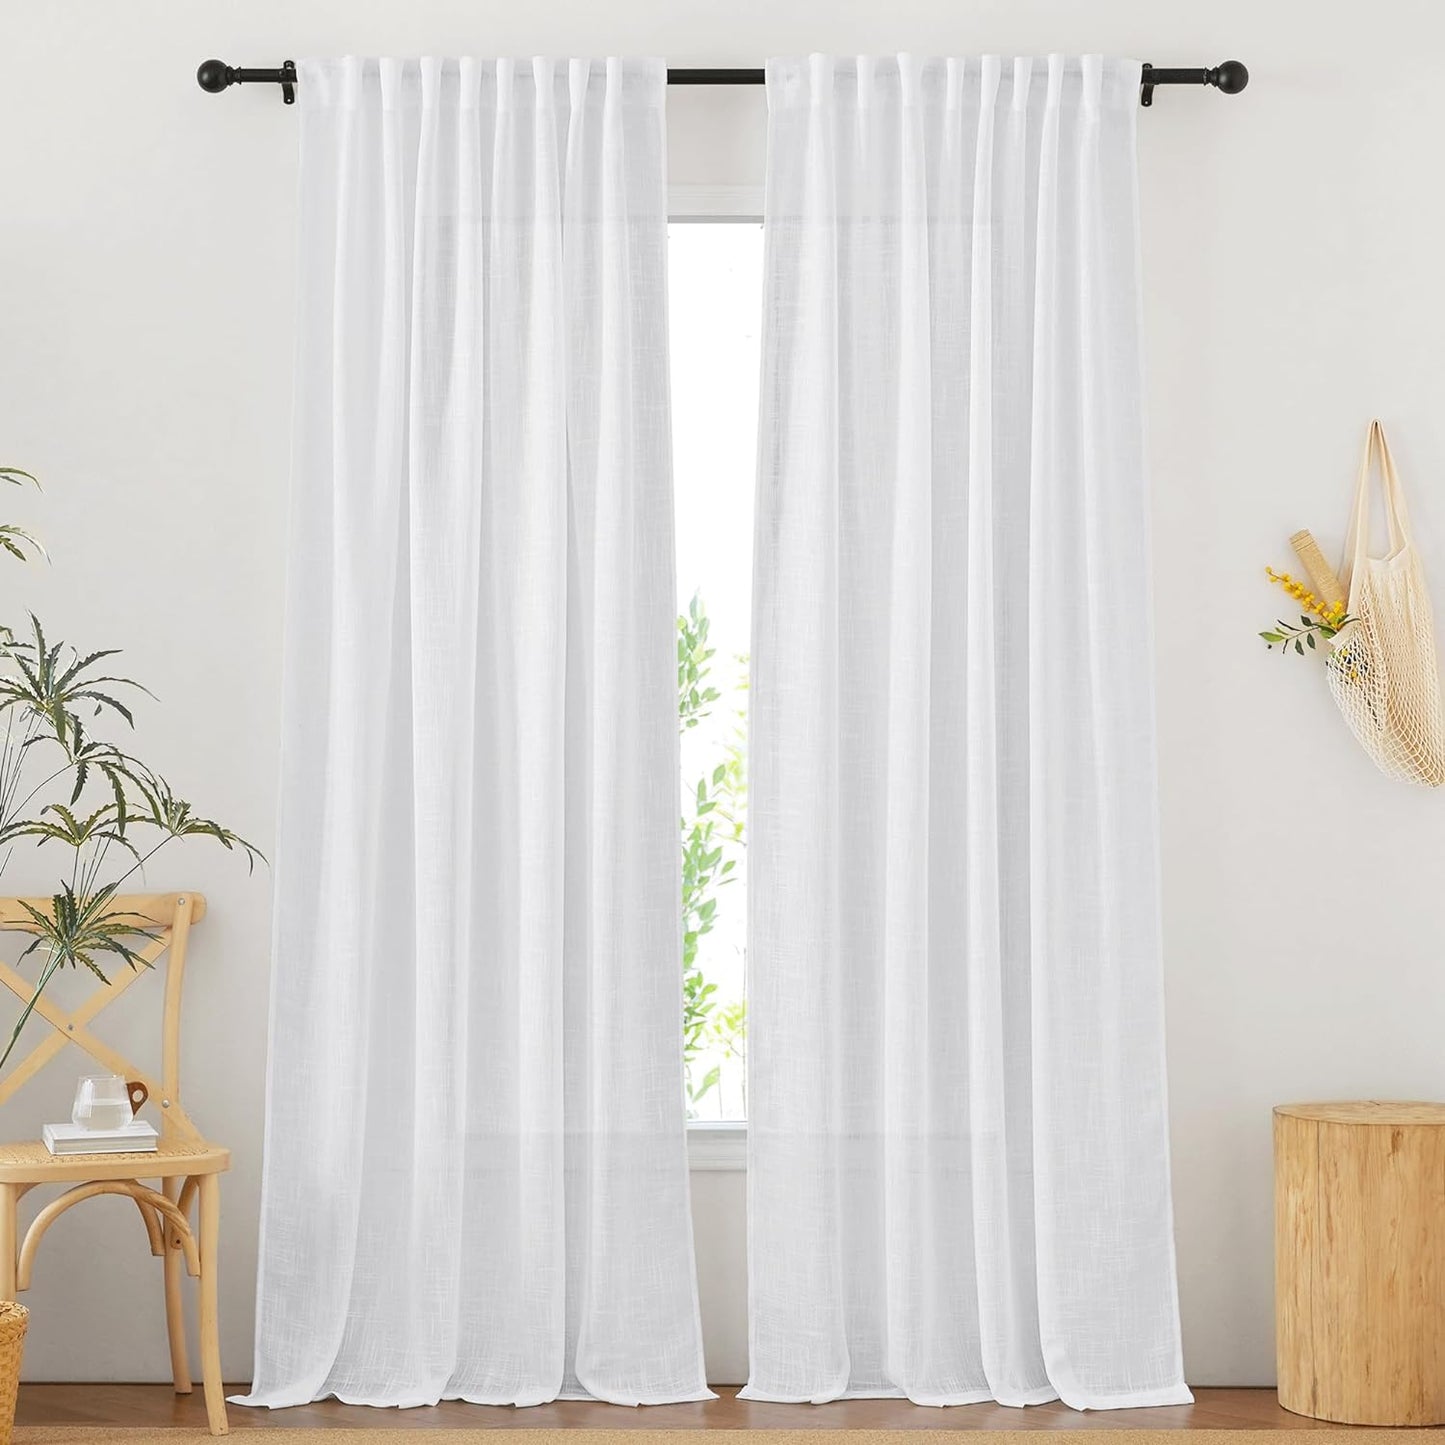 NICETOWN Linen Textured Curtain for Bedroom/Living Room Thermal Insulated Back Tab Linen Look Curtain Drapes Soft Rich Material Light Reducing Drape Panels for Window, 2 Panels, 52 X 84 Inch, Linen  NICETOWN White W52 X L84 